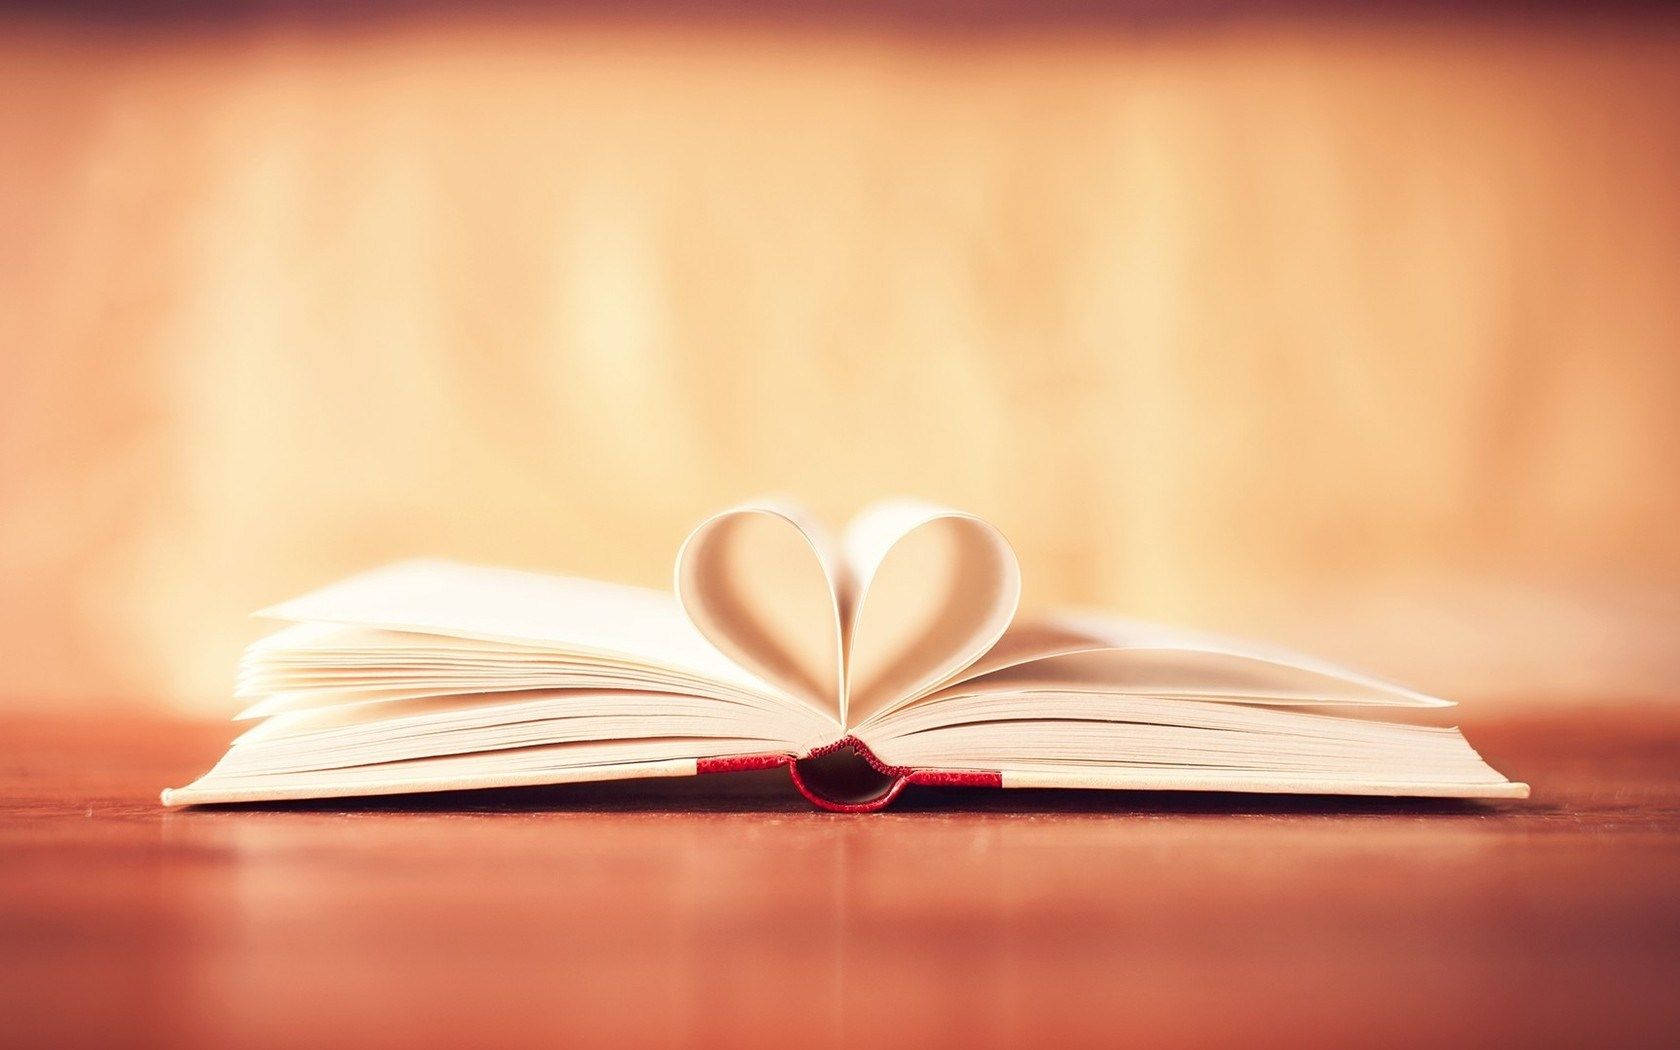 A Gentle Heart Beats Among Pages